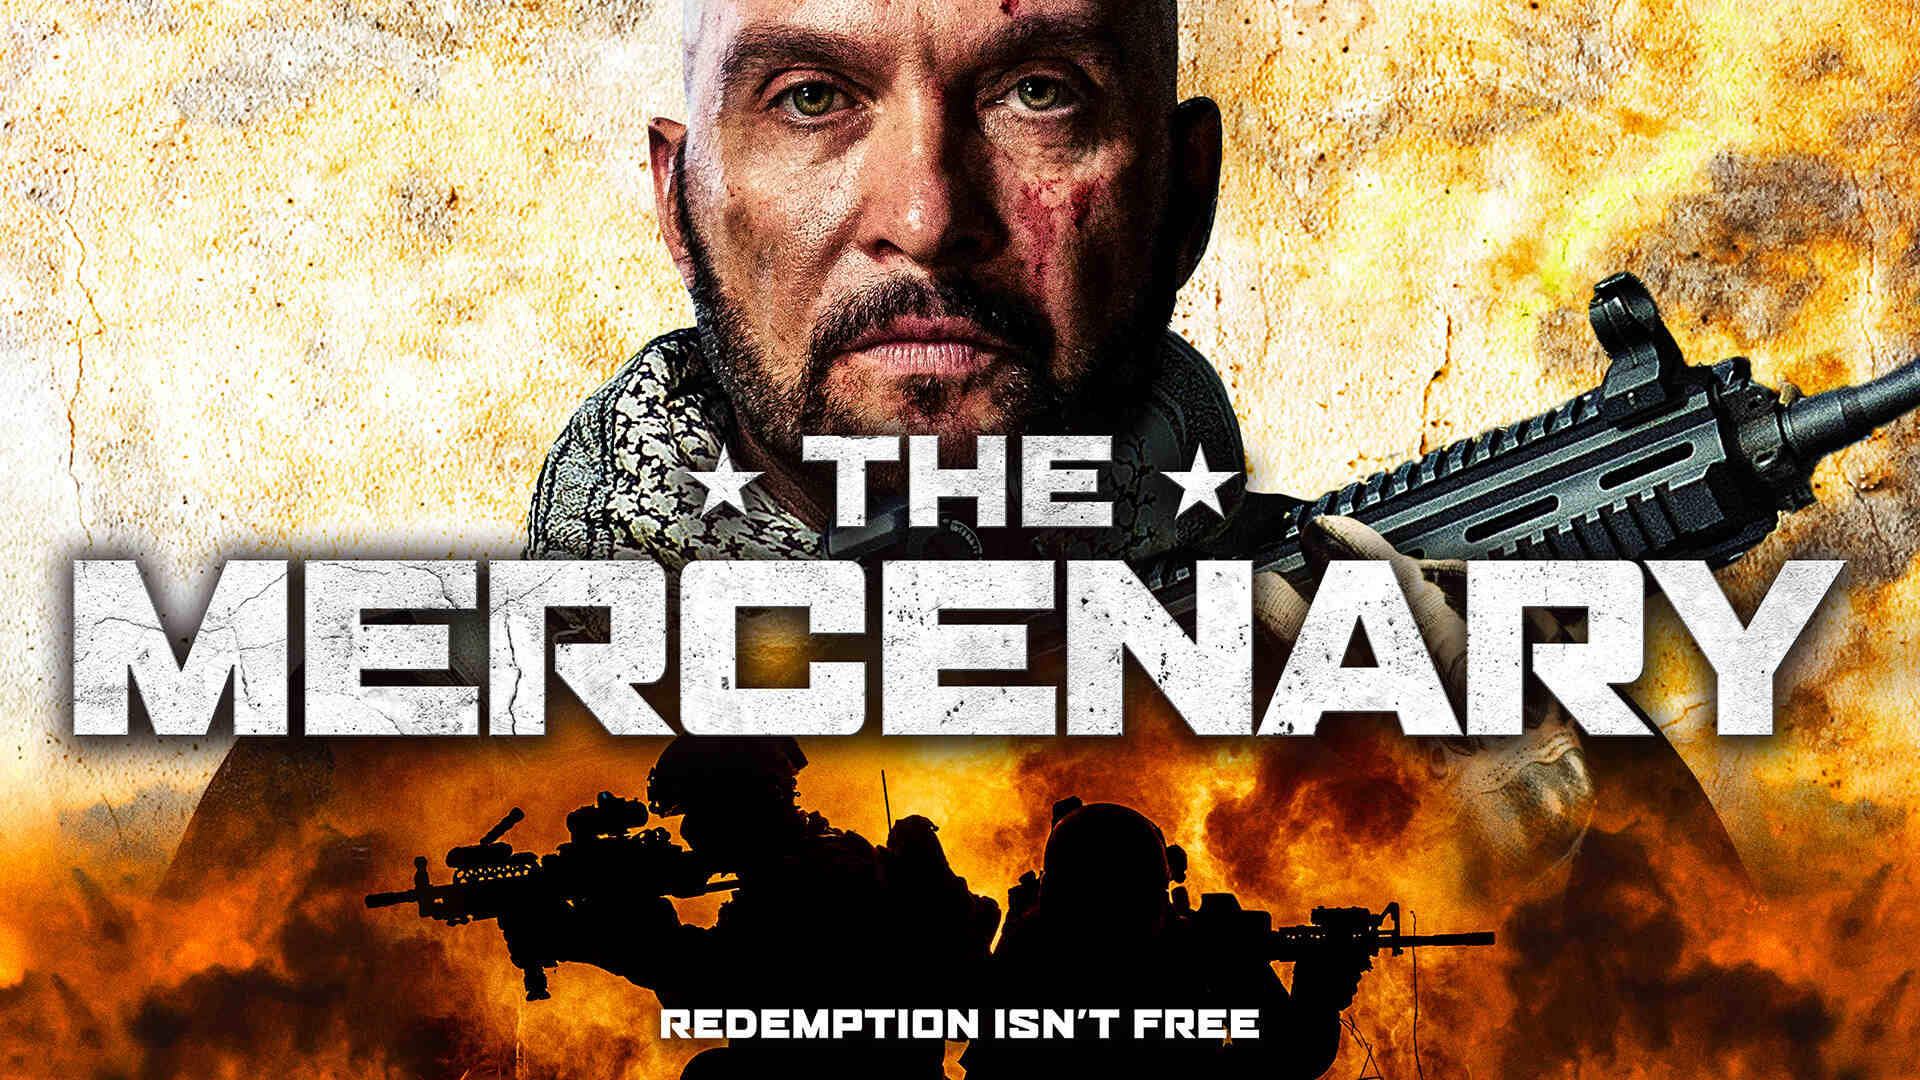 34 Facts about the movie The Mercenary - Facts.net